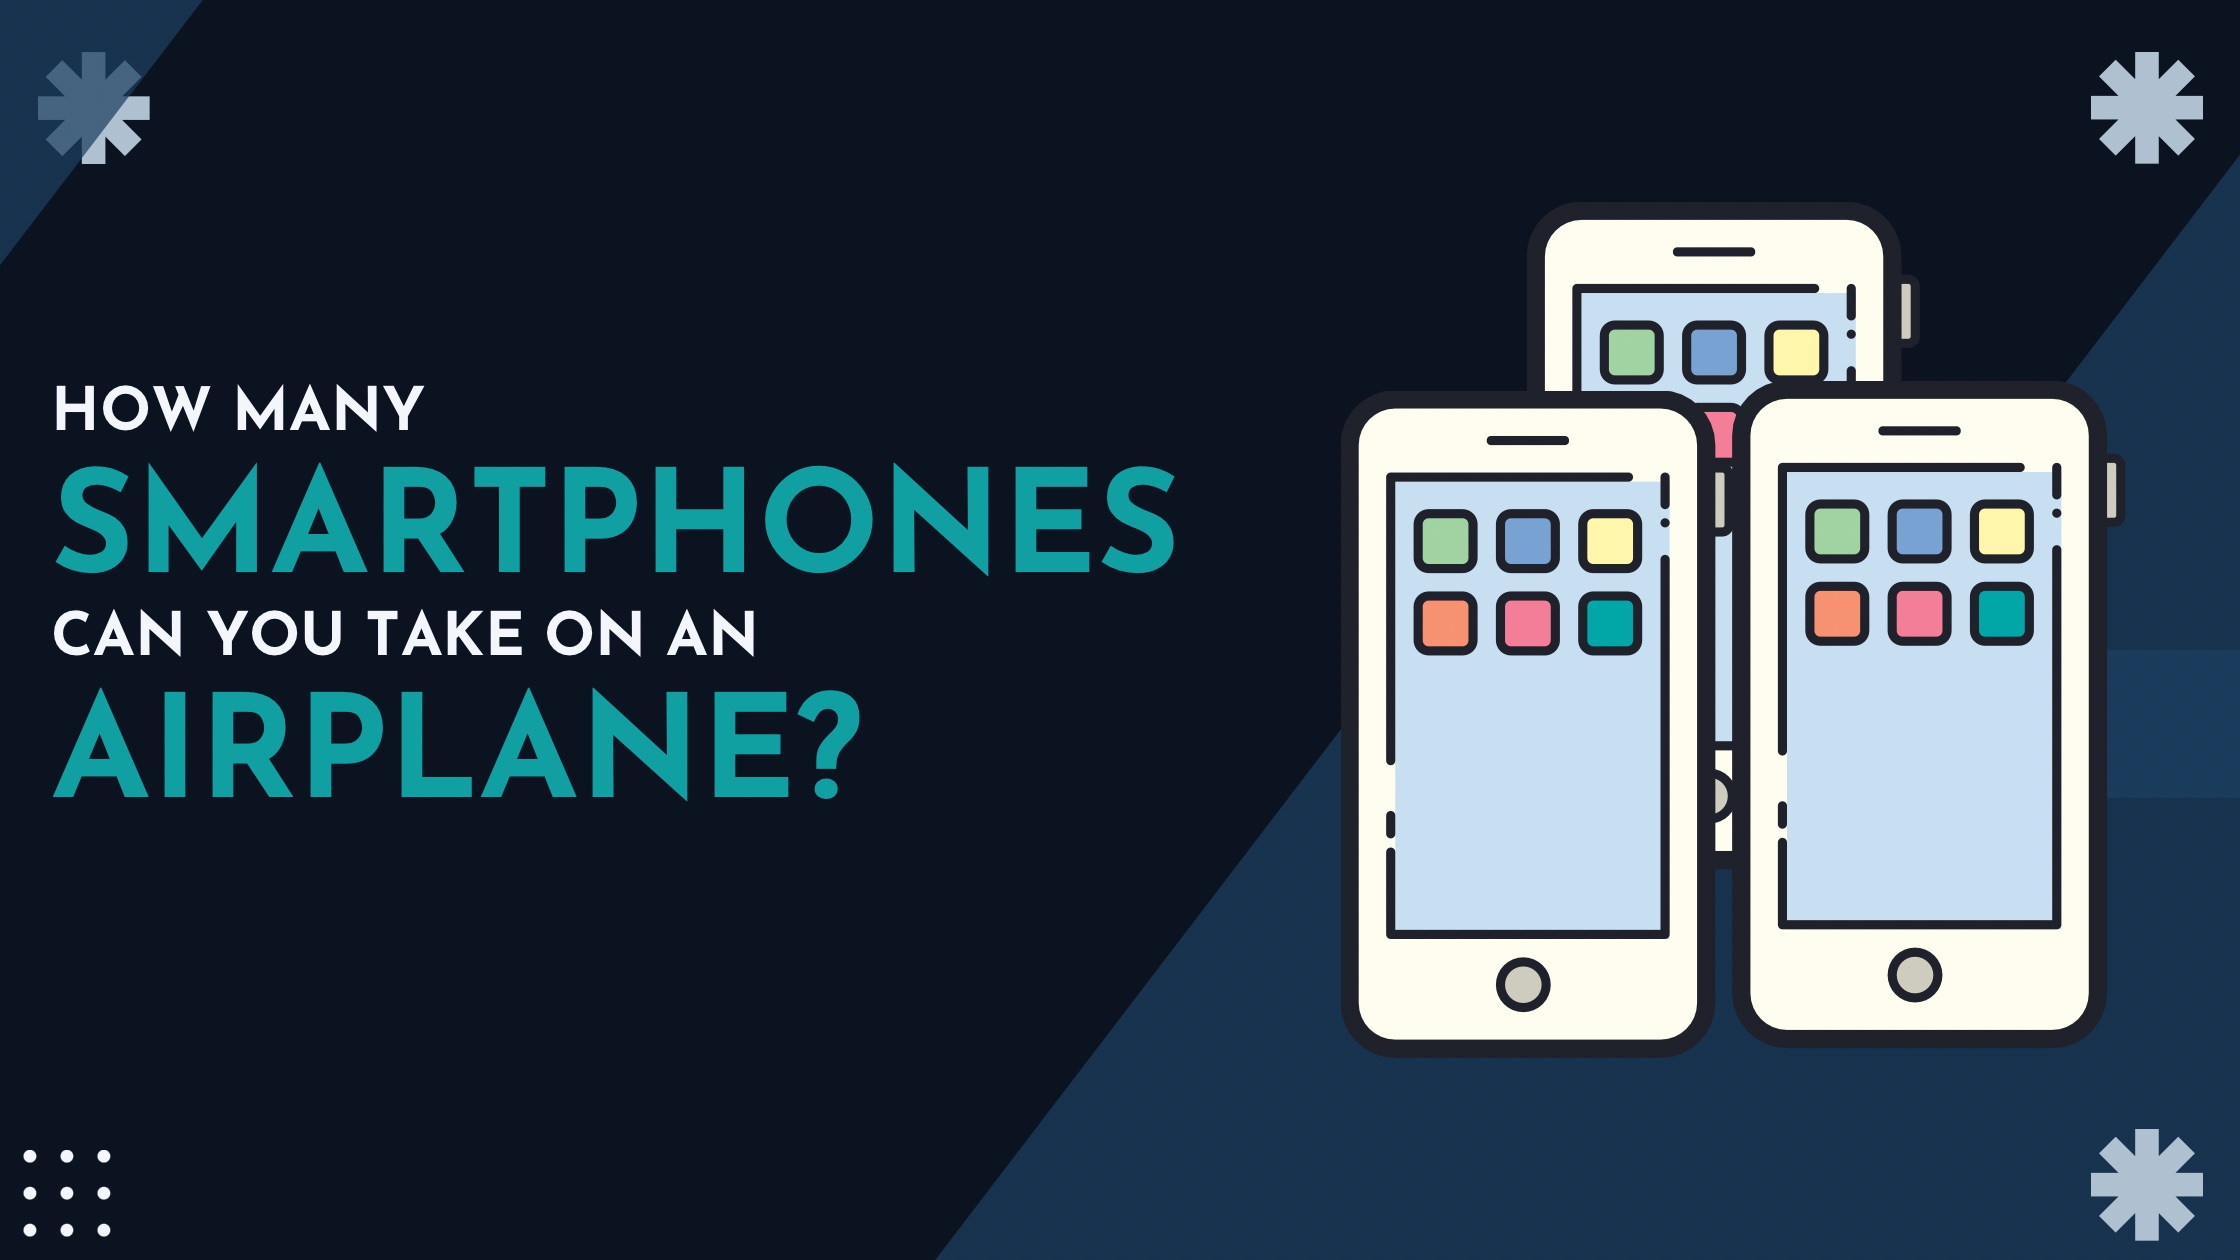 How Many Smartphones Can You Take On An Airplane?